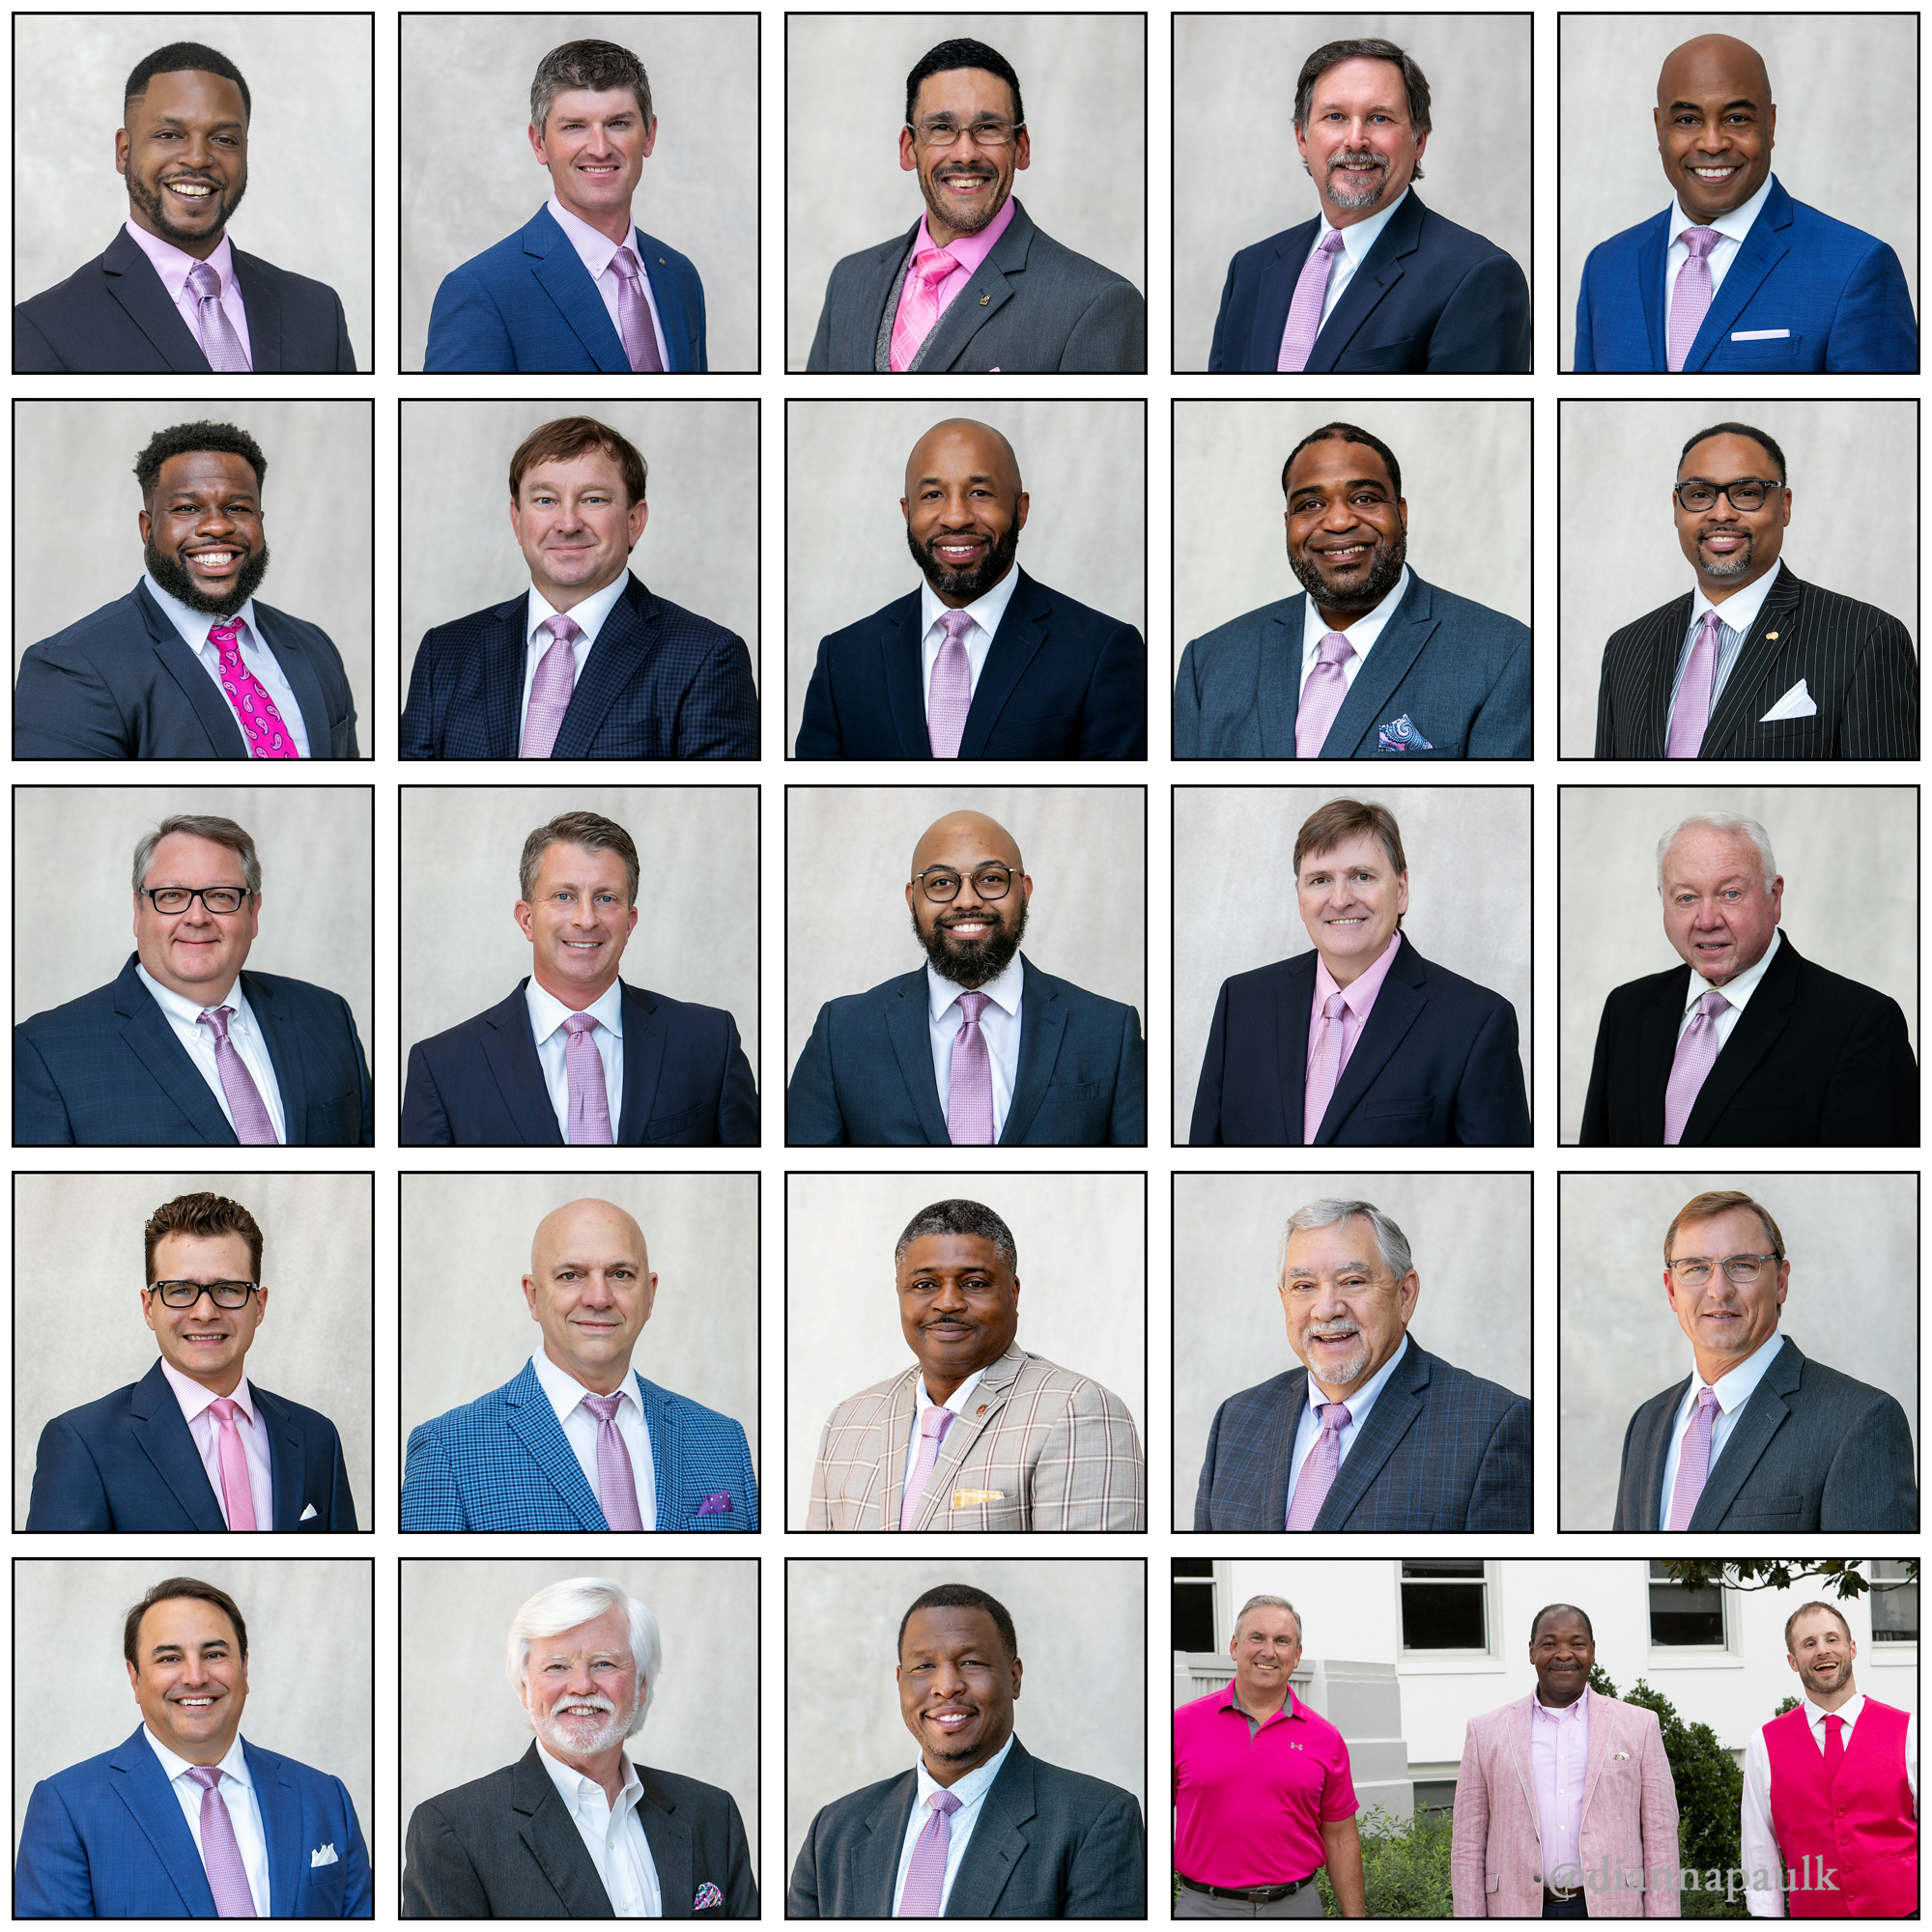 American Cancer Society's Real Men Wear Pink Campaign participants for Montgomery AL.